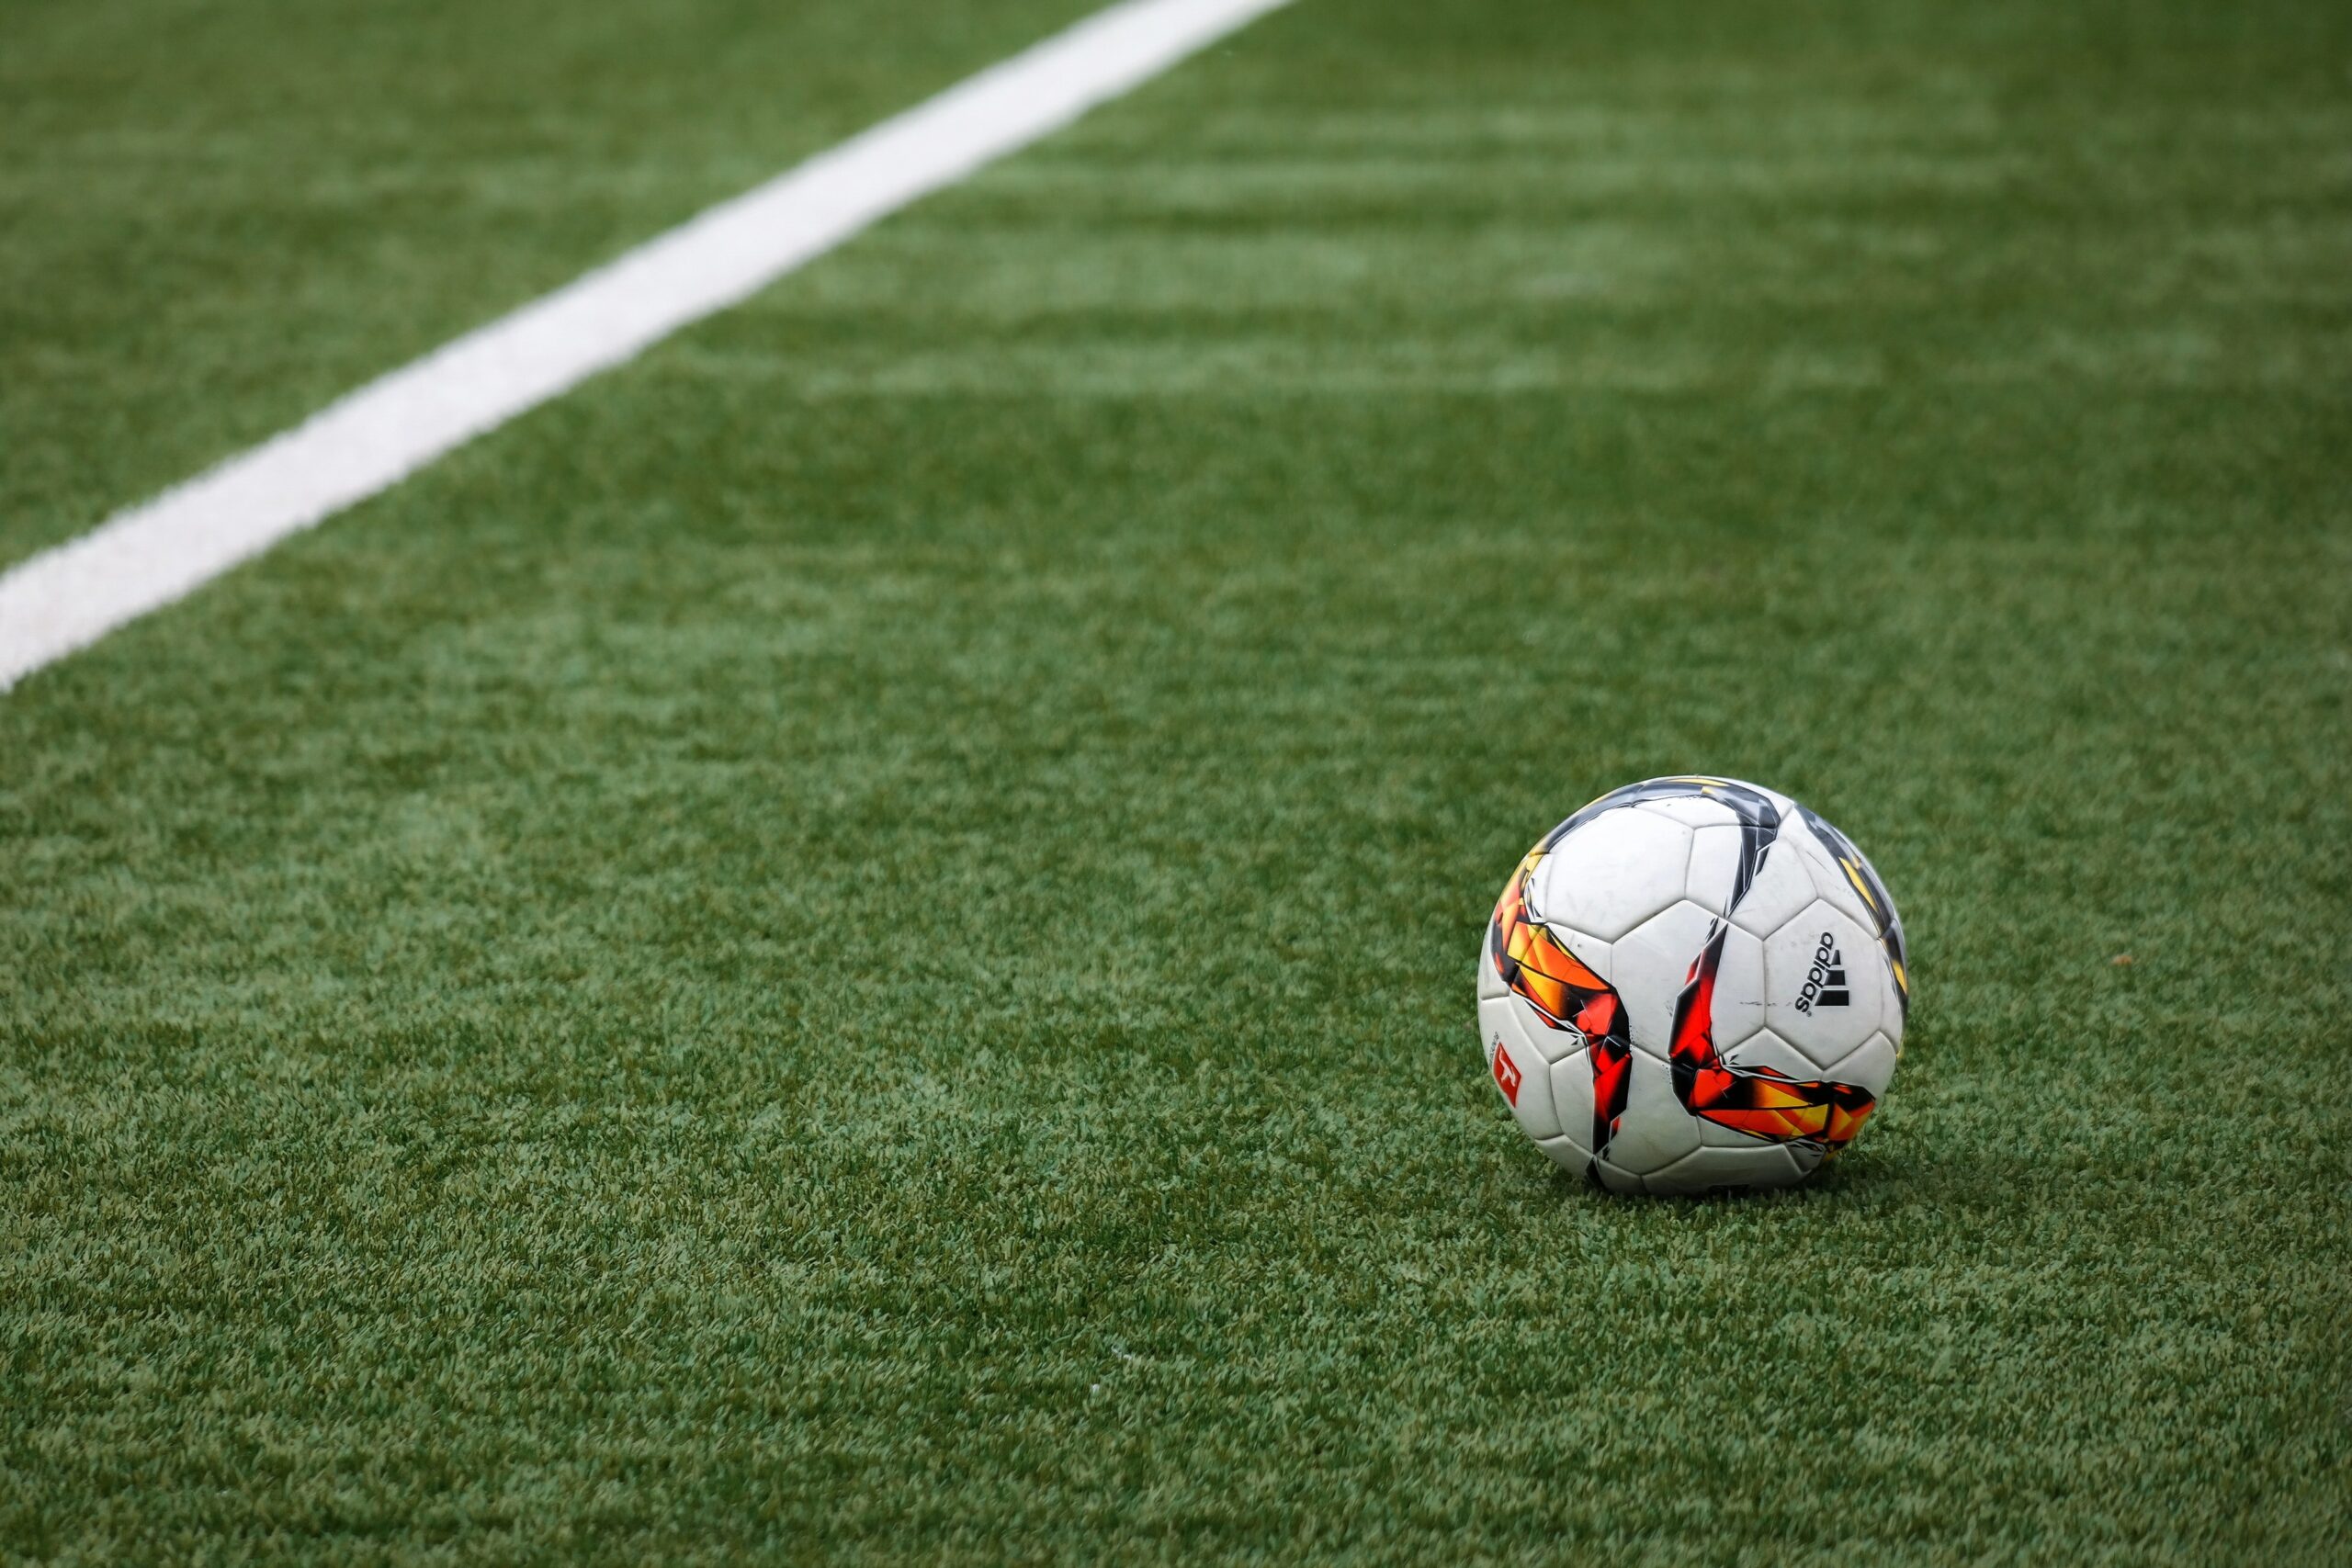 Stock photo of a soccer ball on a soccer pitch.